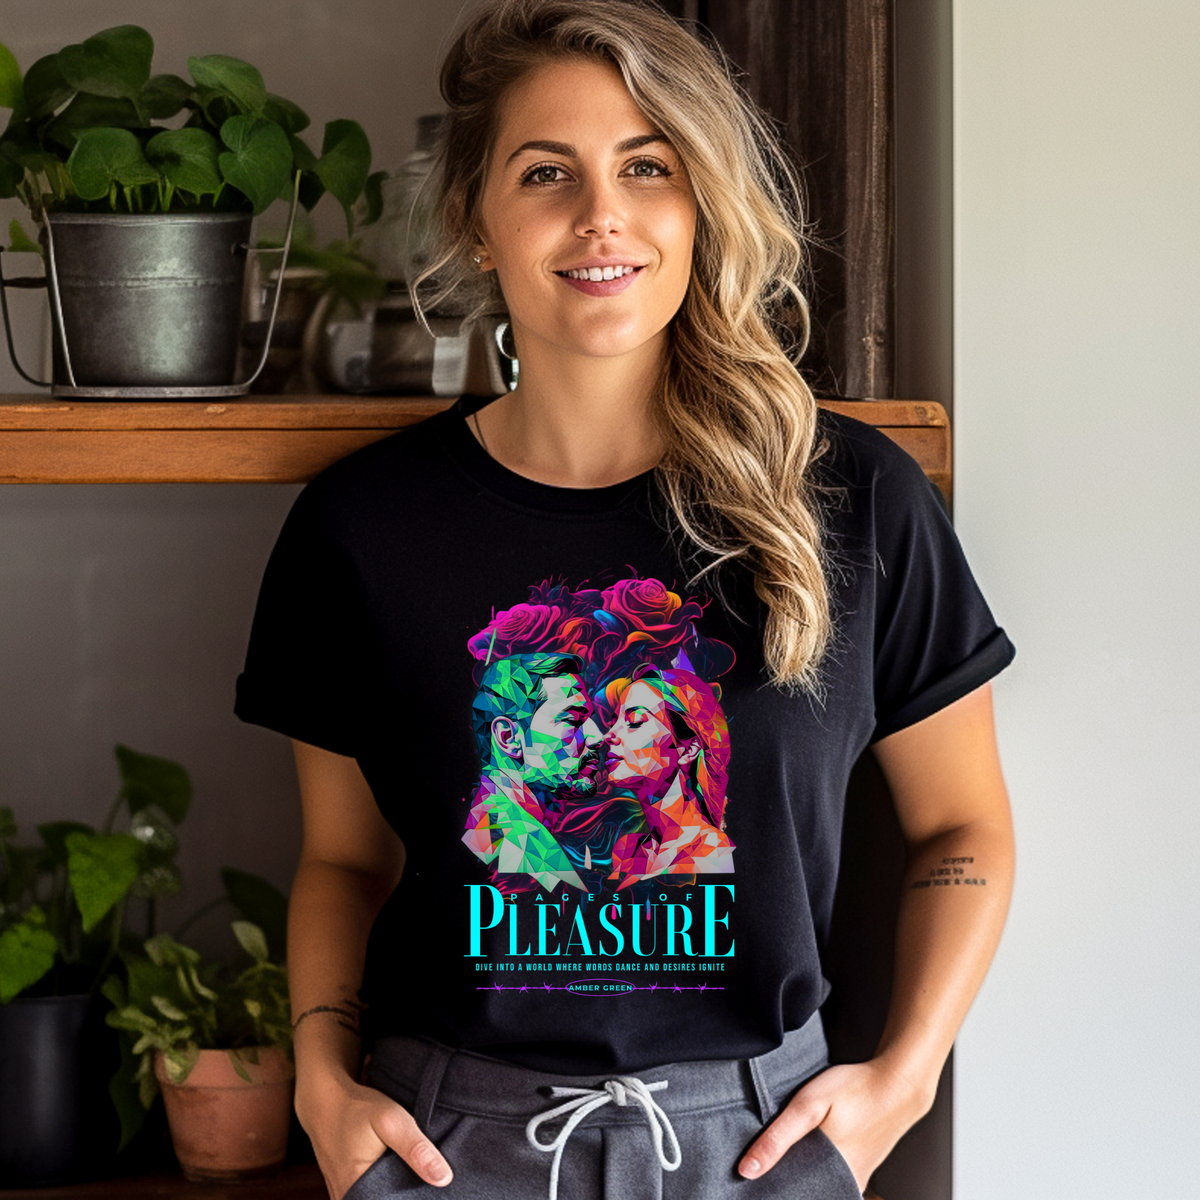 Pages of Pleasure T-Shirt